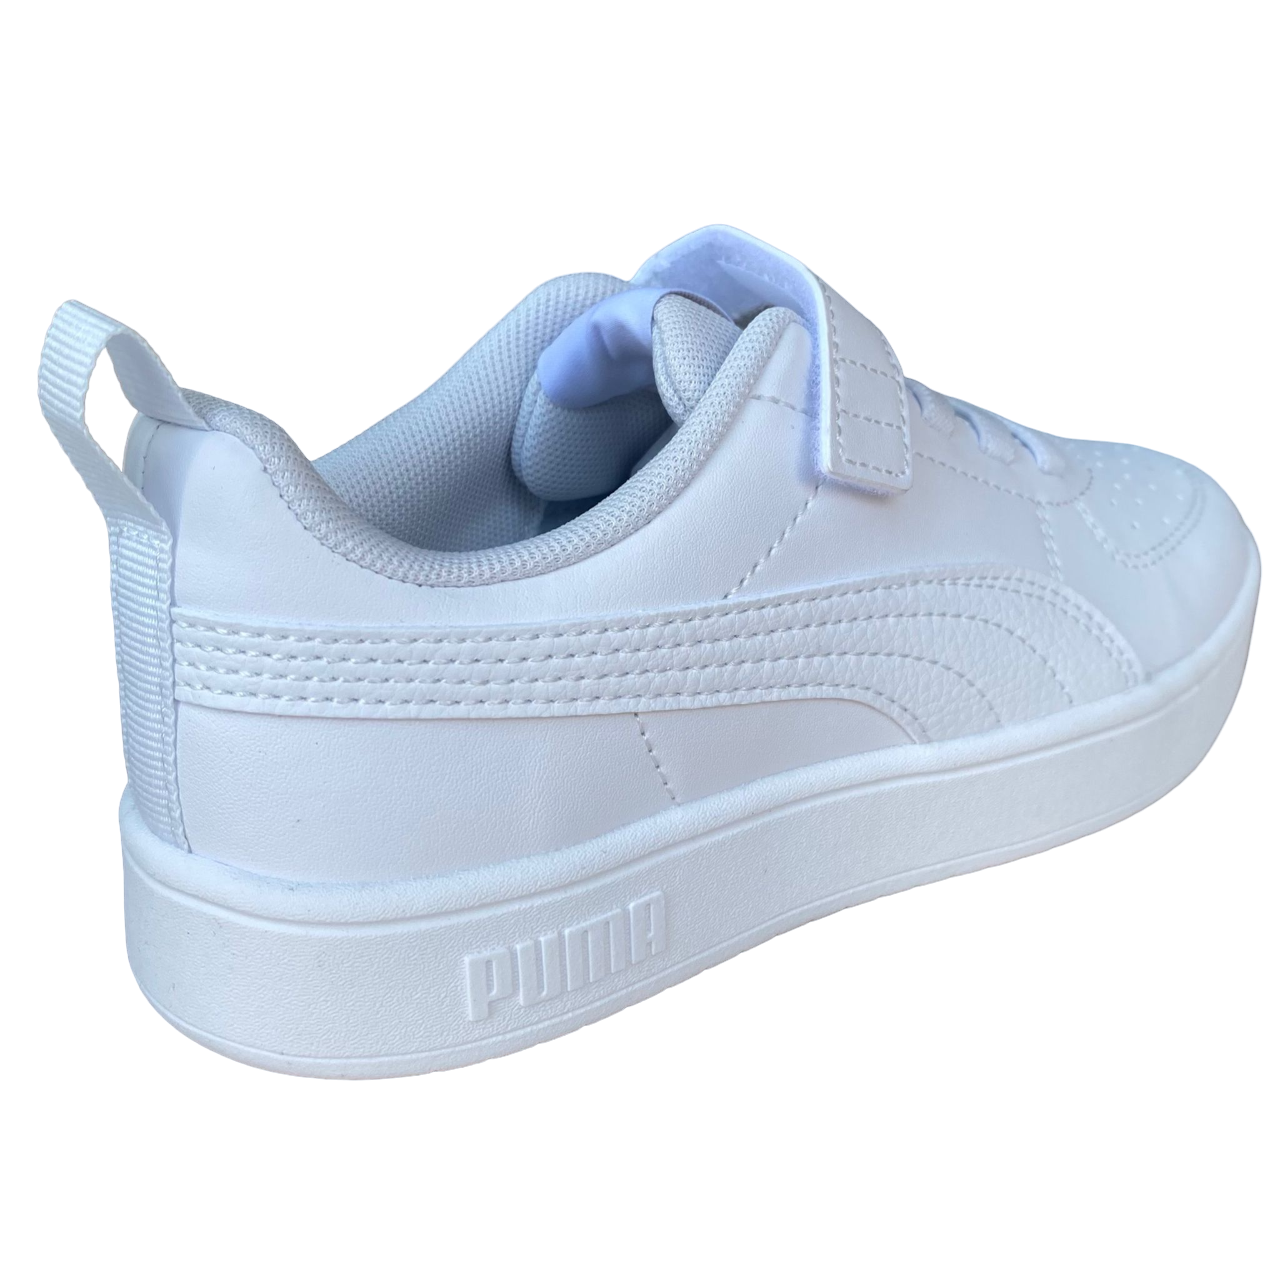 Puma boys&#39; sneakers shoe with elastic and tear Rickie AC+PS 385836-01 white-ice gray